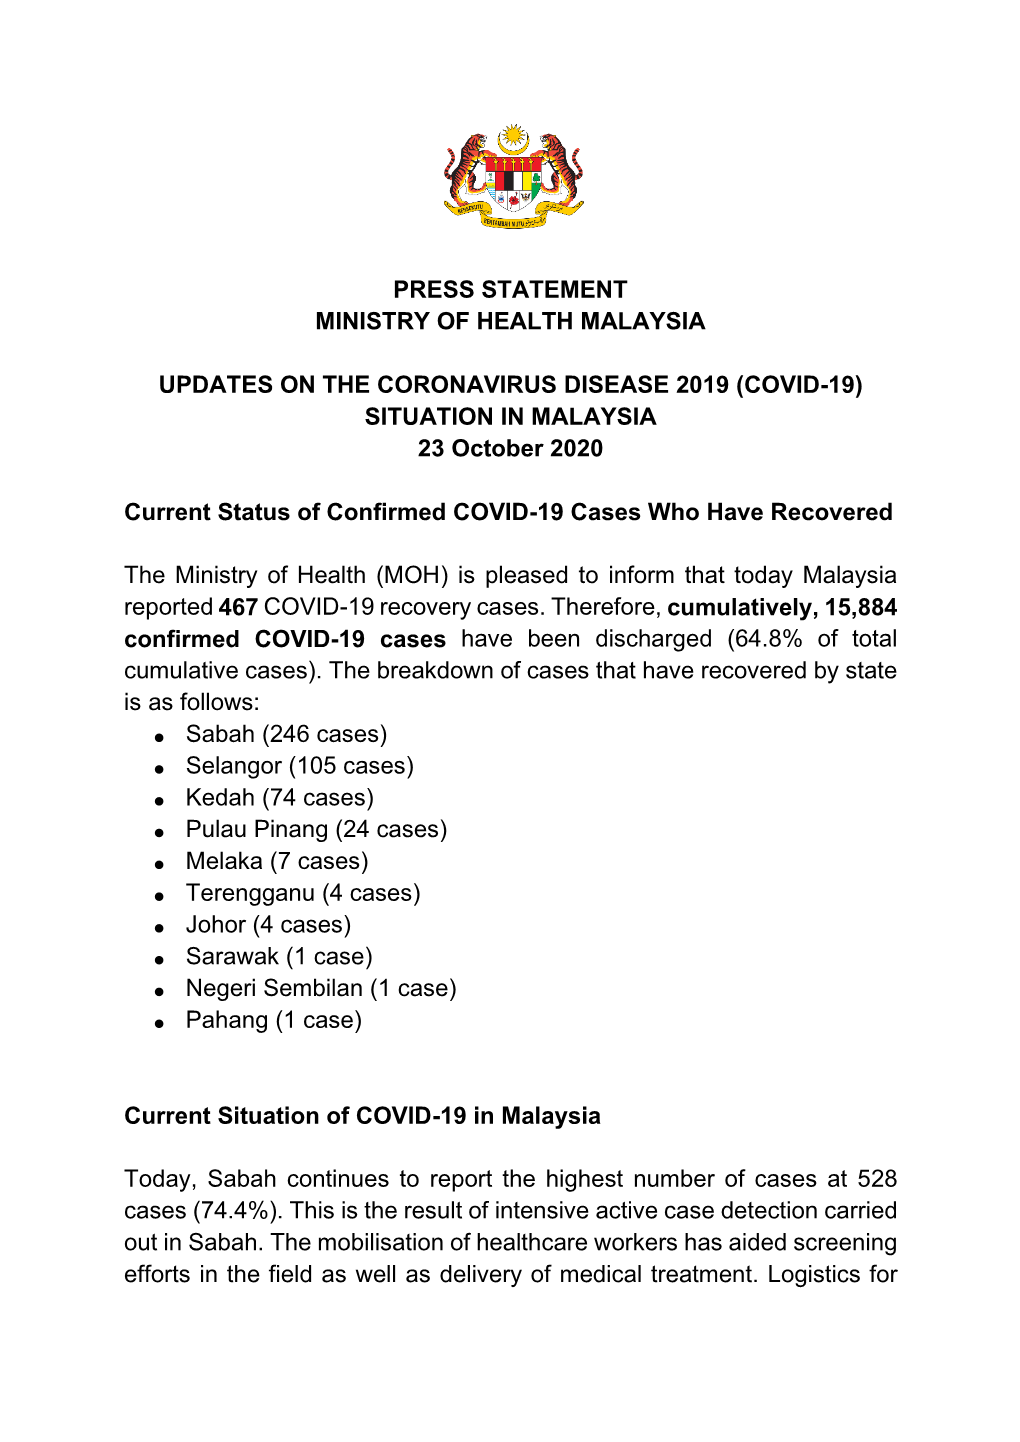 PRESS STATEMENT MINISTRY of HEALTH MALAYSIA UPDATES on the CORONAVIRUS DISEASE 2019 (COVID-19) SITUATION in MALAYSIA 23 October